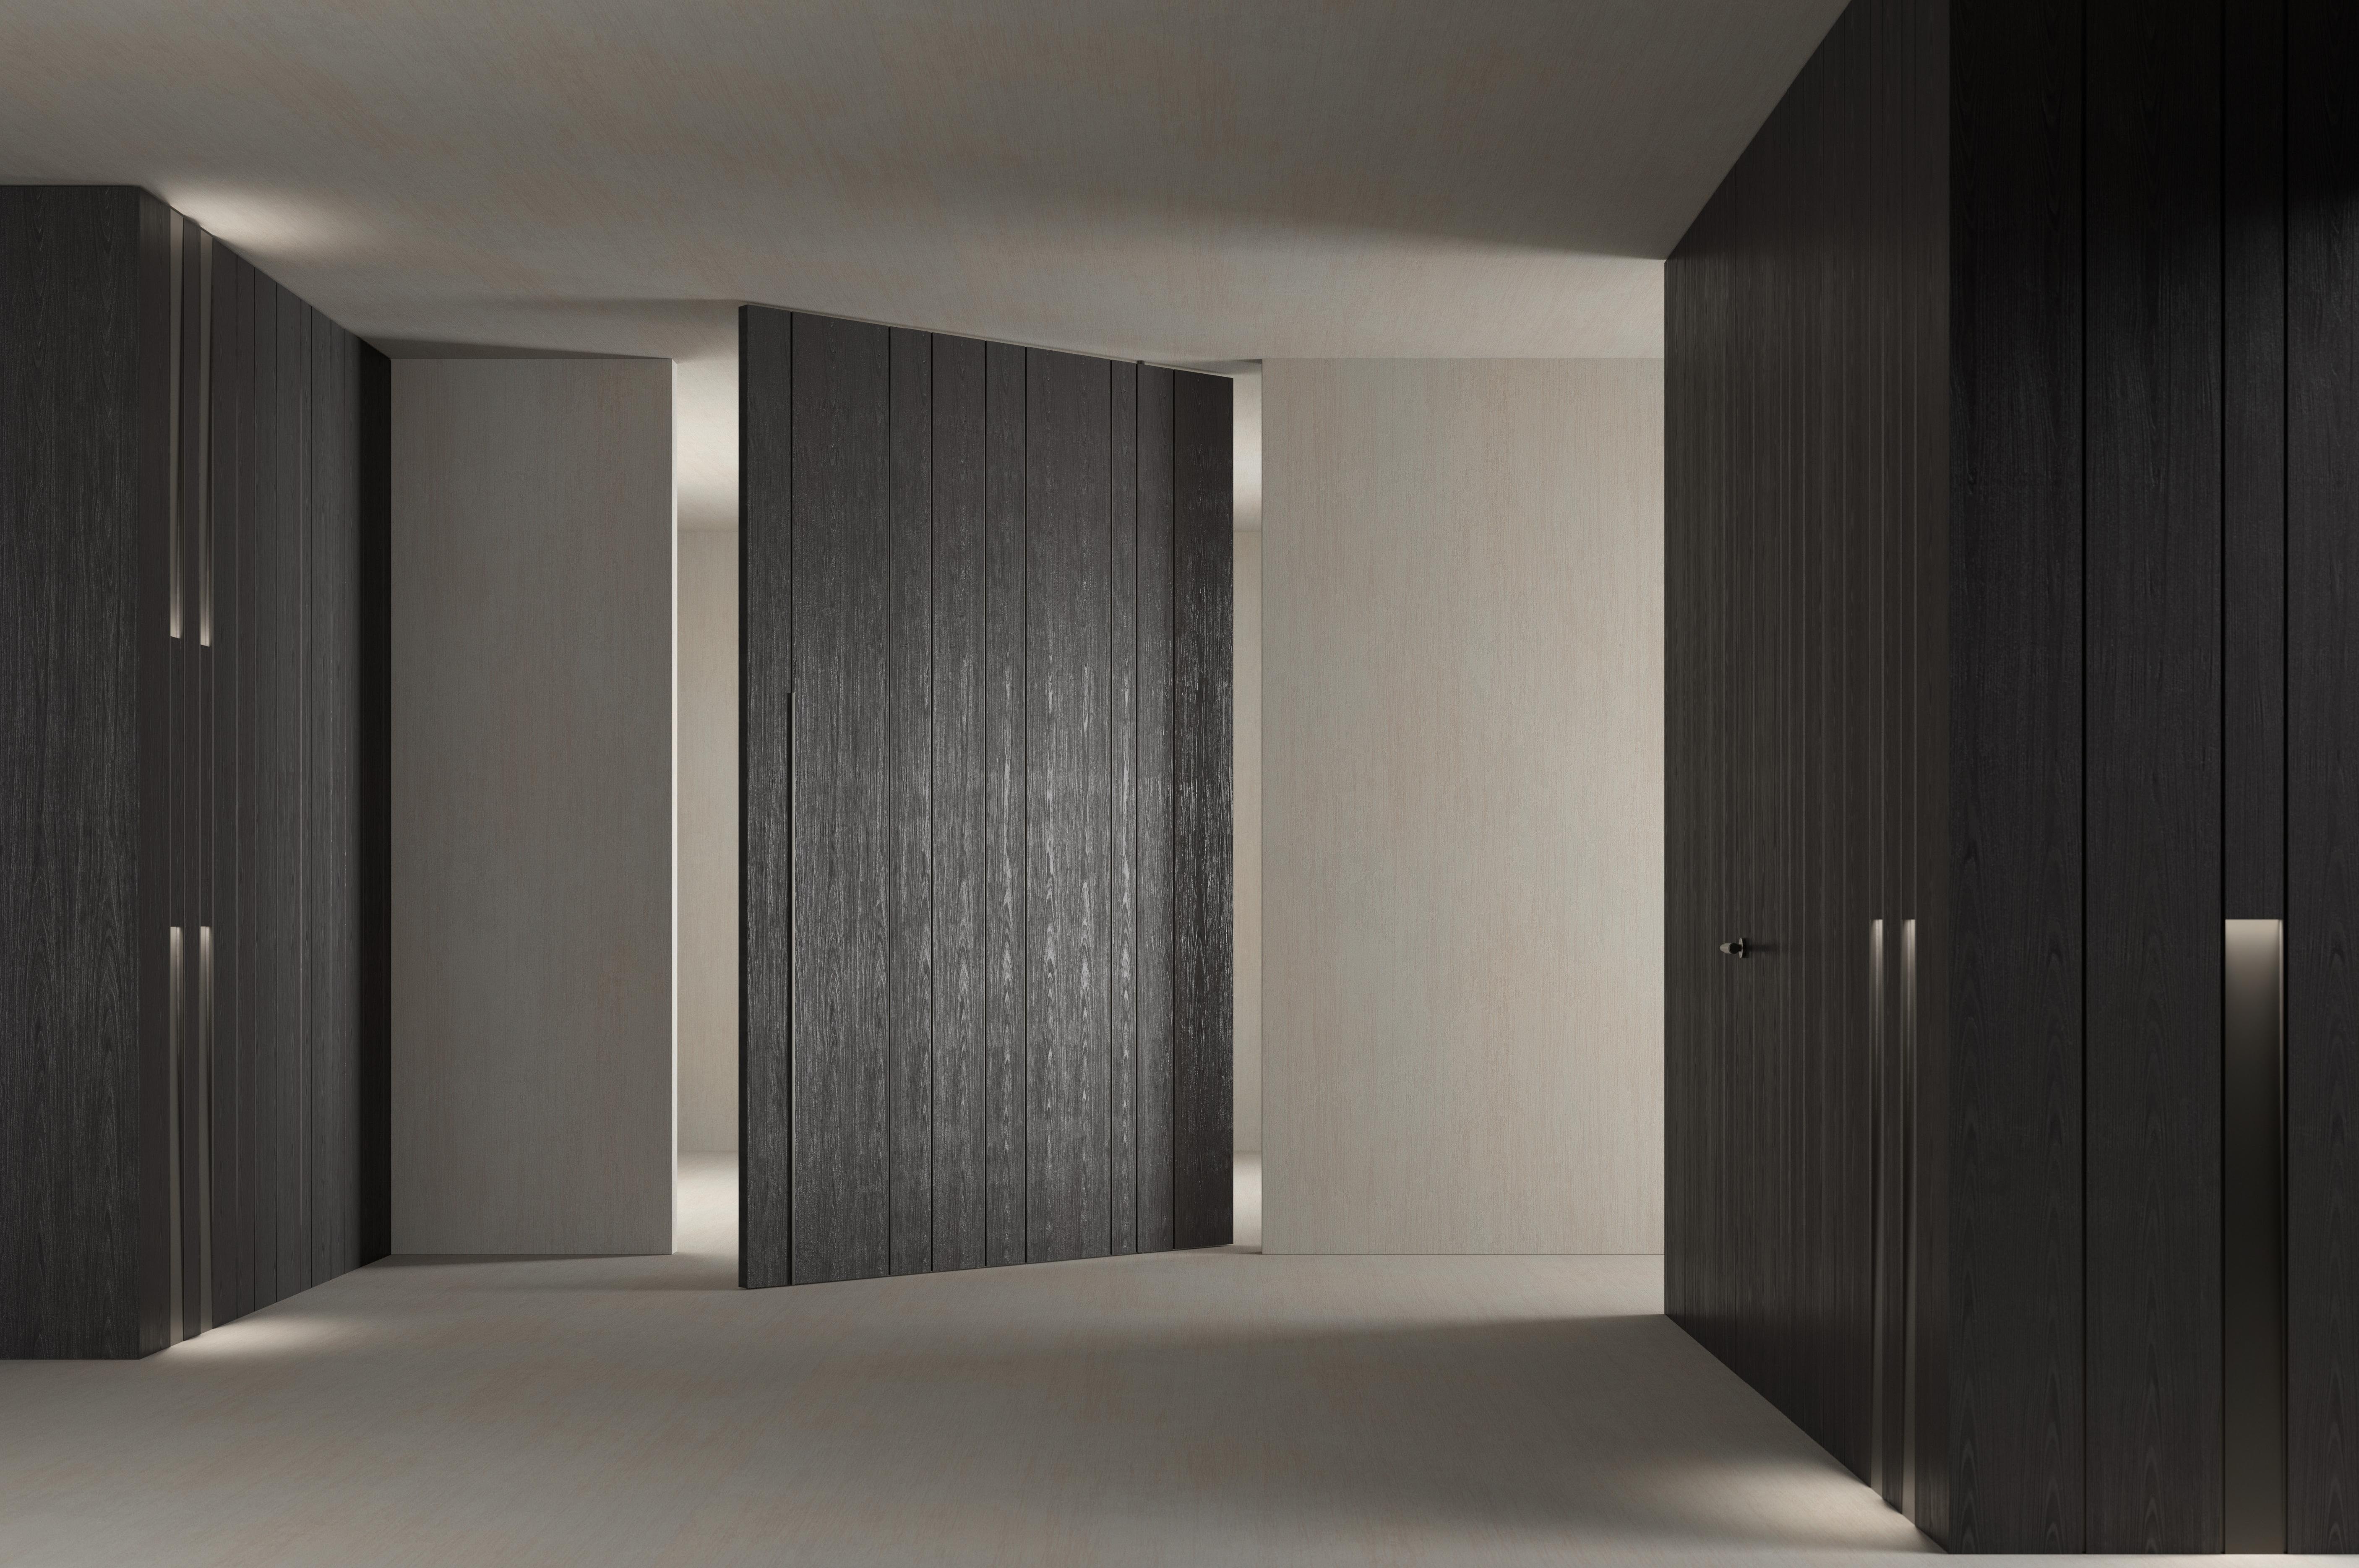 laurameroni made to measure pivot doors in custom dimensions and finishes